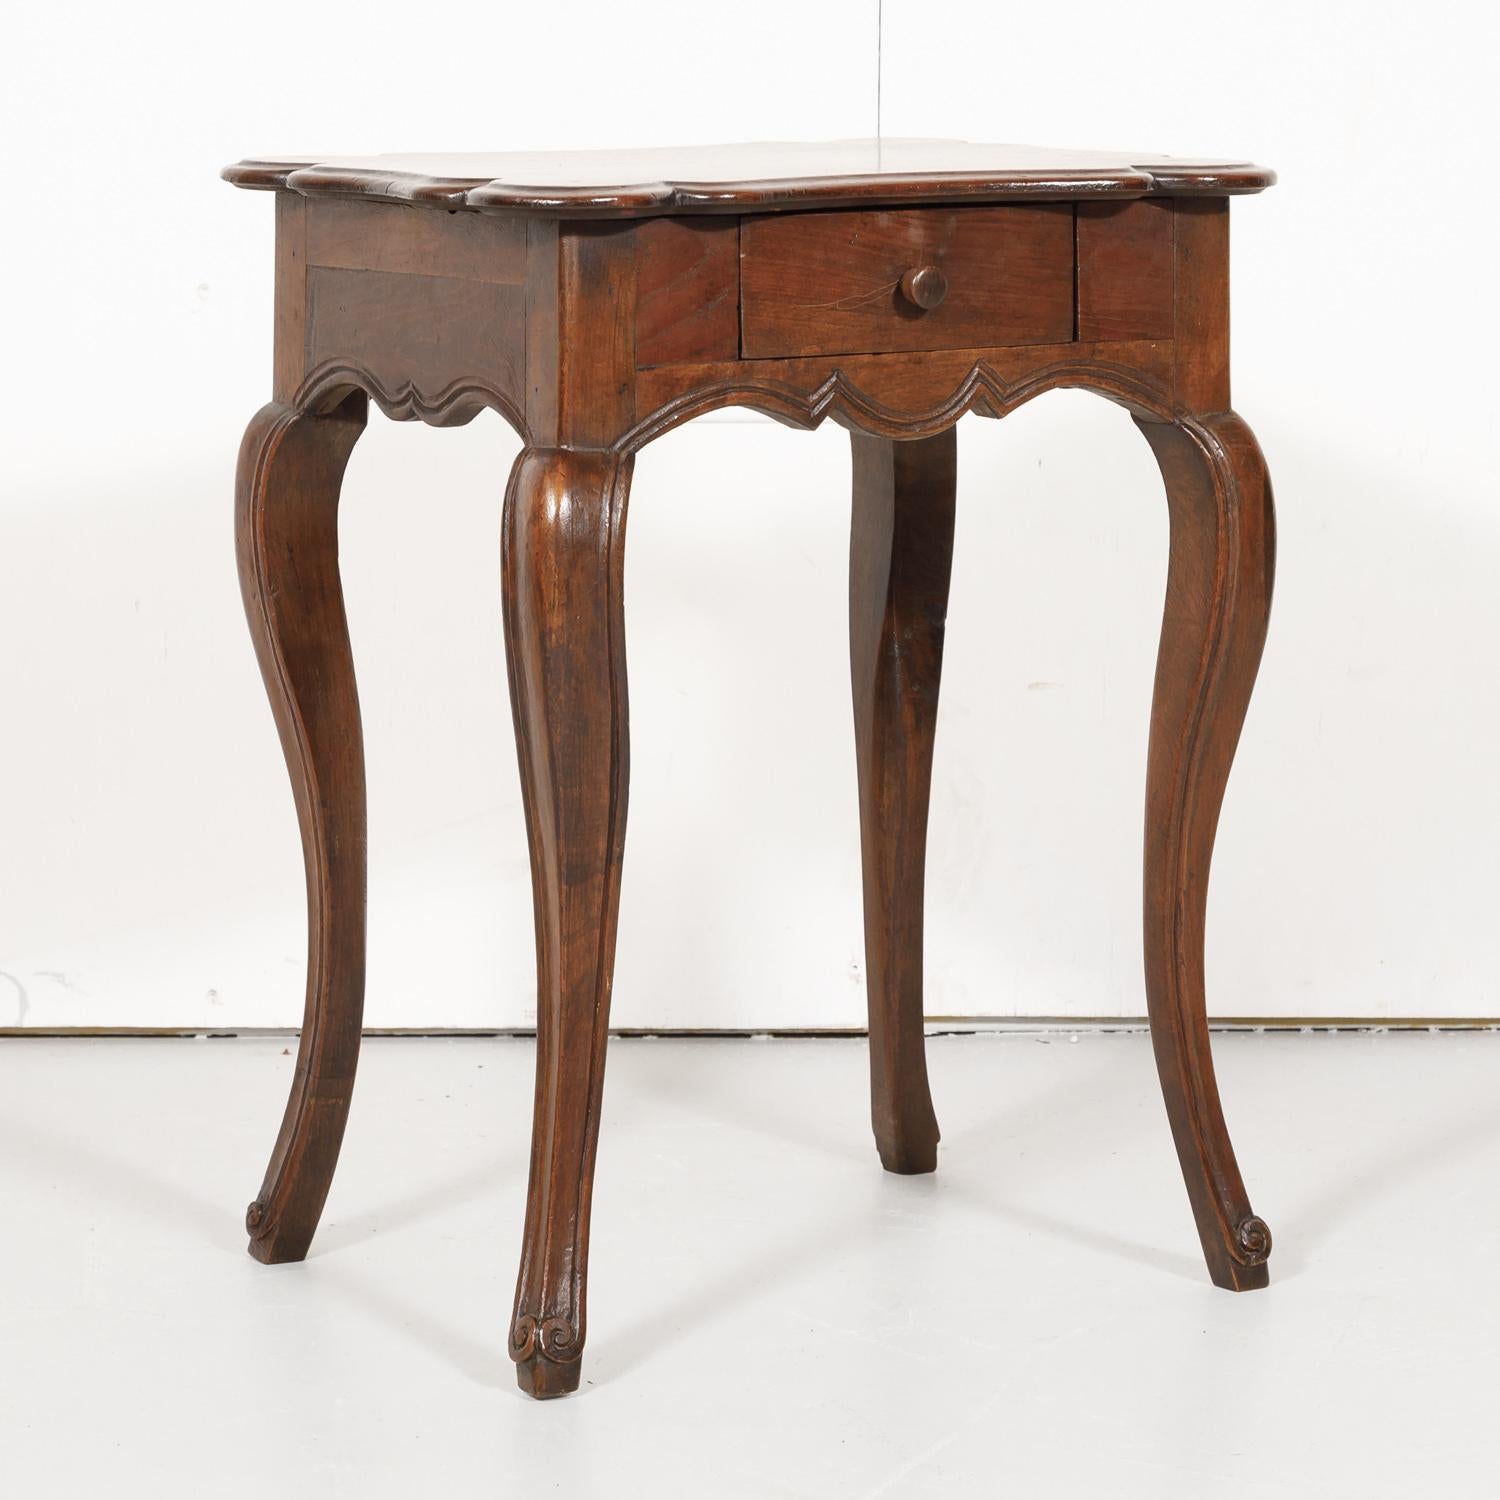 19th century French Country Louis XV style side table constructed of walnut in the South of France near Gordes having a moulded serpentine top that sits above a nicely scalloped apron with a single drawer. Raised on graceful cabriolet legs ending in